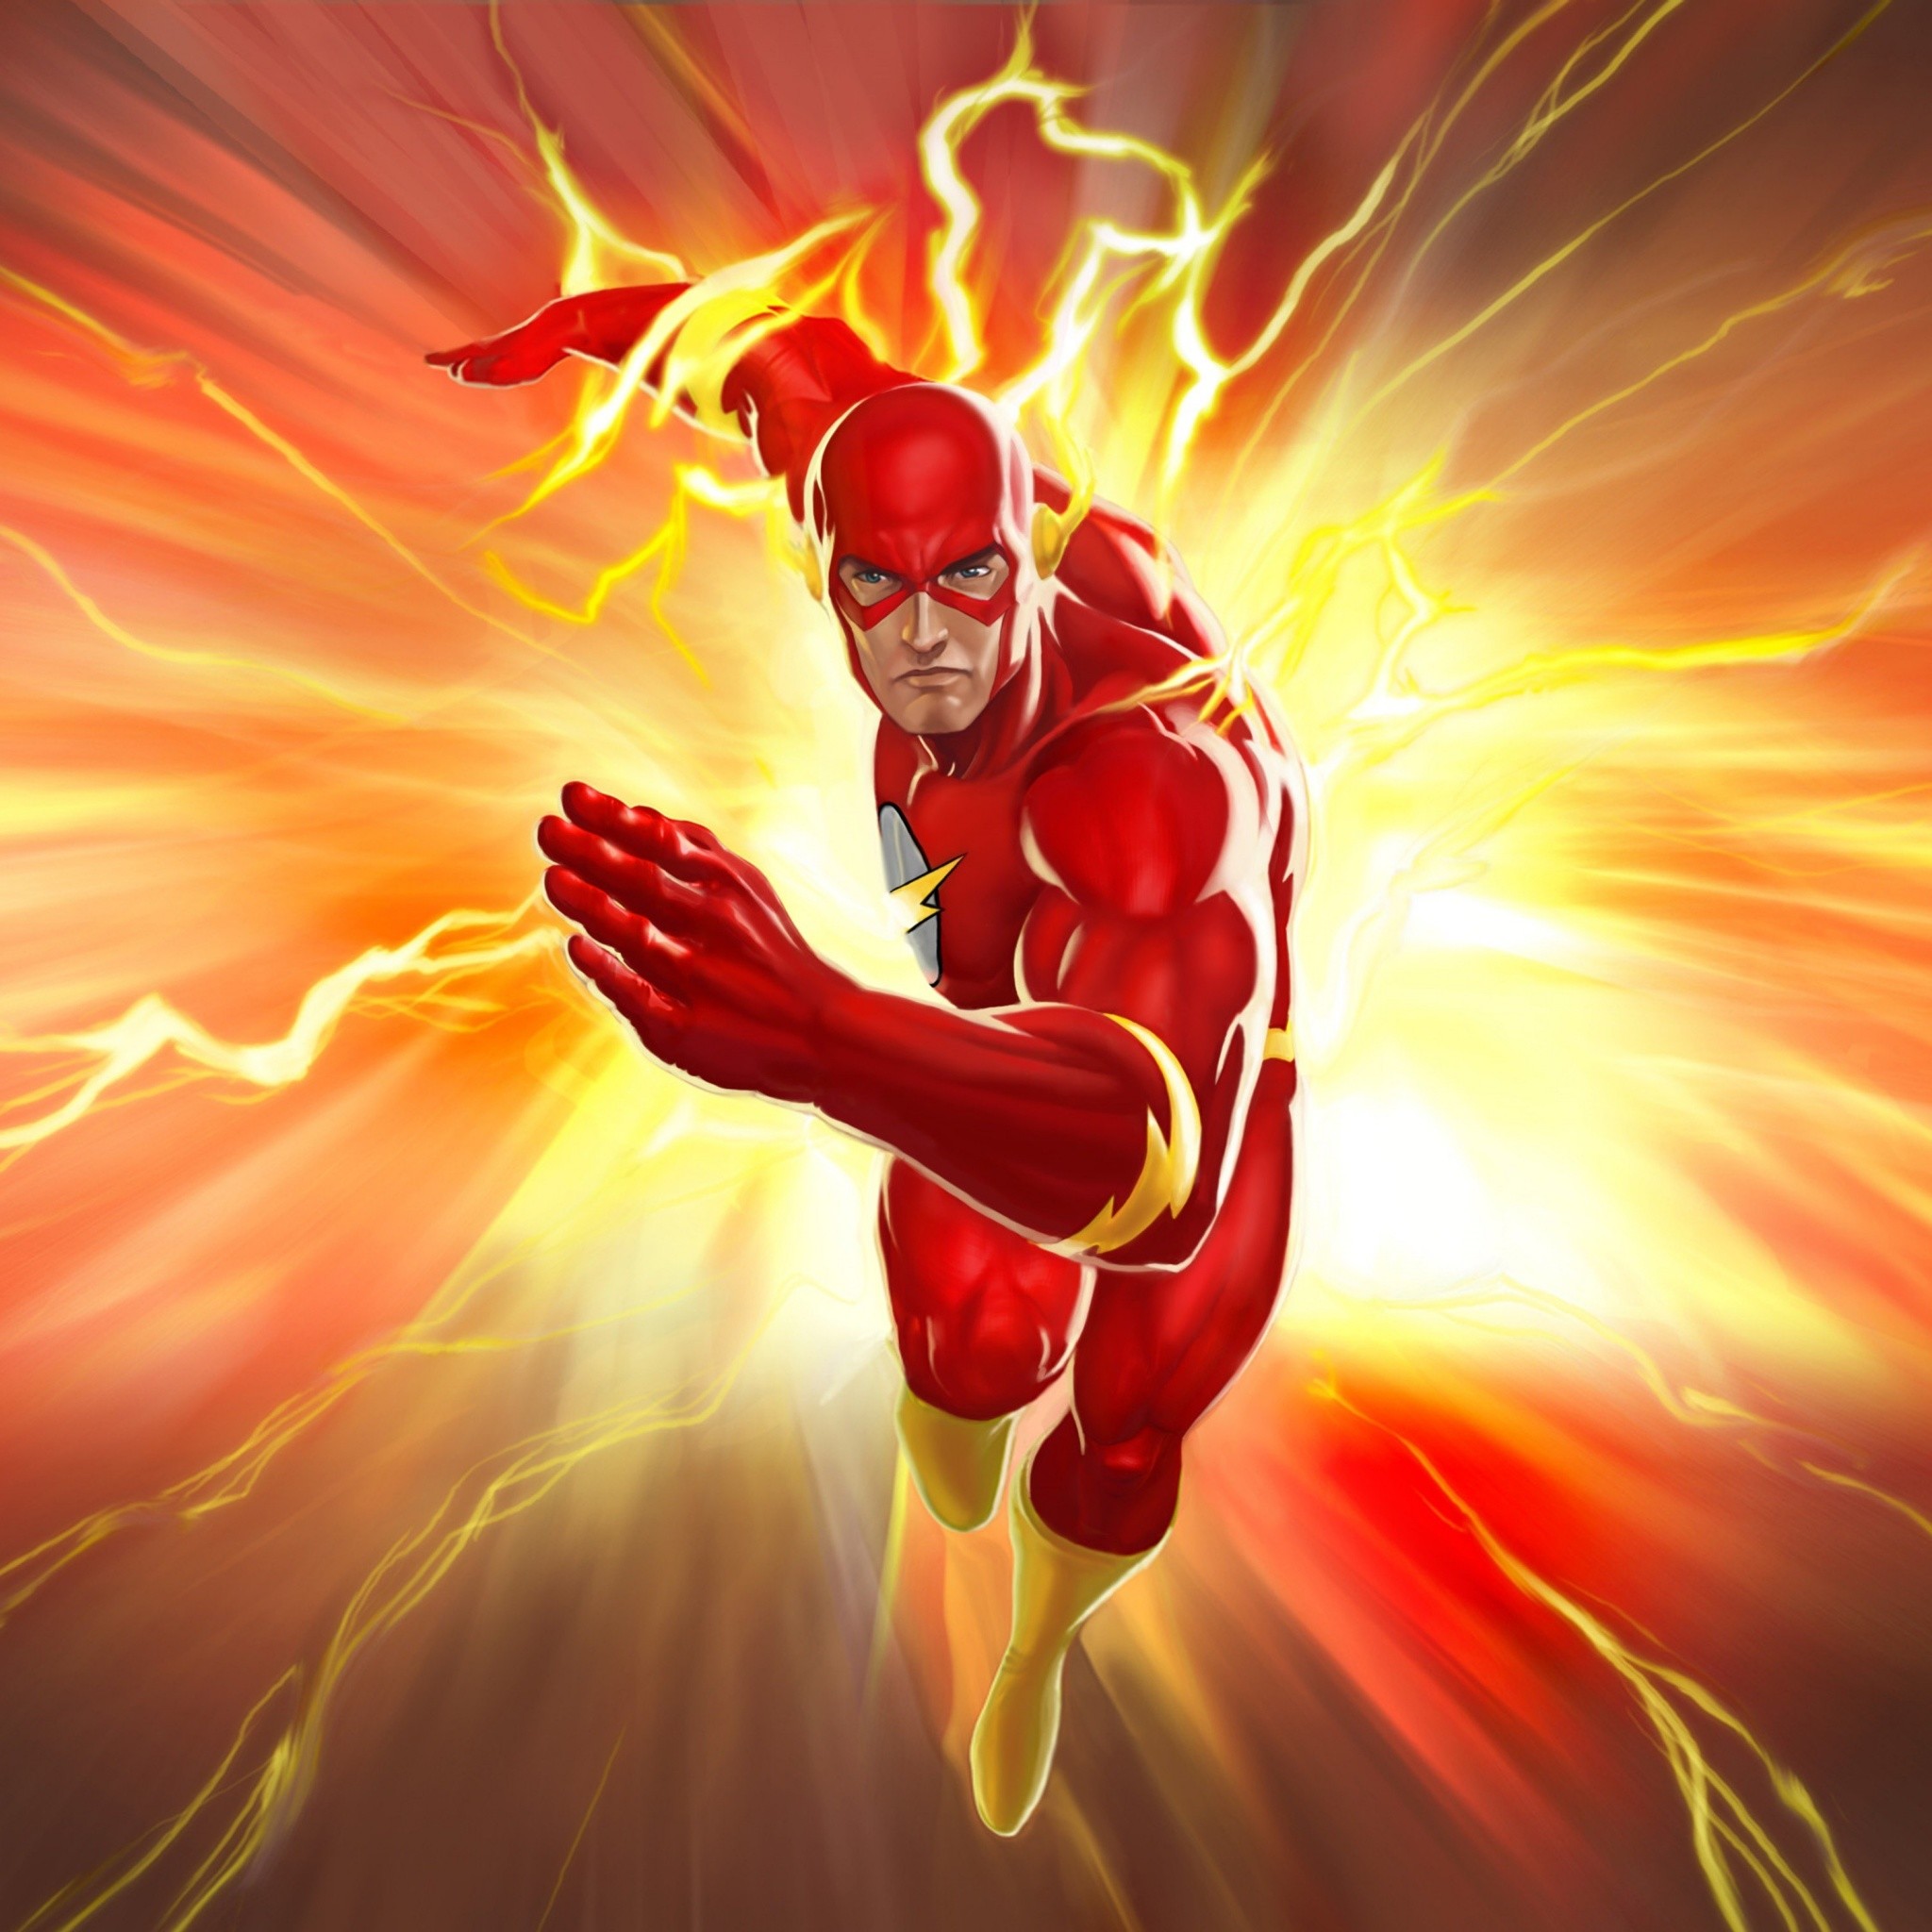 2048x2048 Flashing The Flash. Tap to see more Barry Allen The Flash iPhone, iPad &  Android wallpapers, backgrounds, fondos!